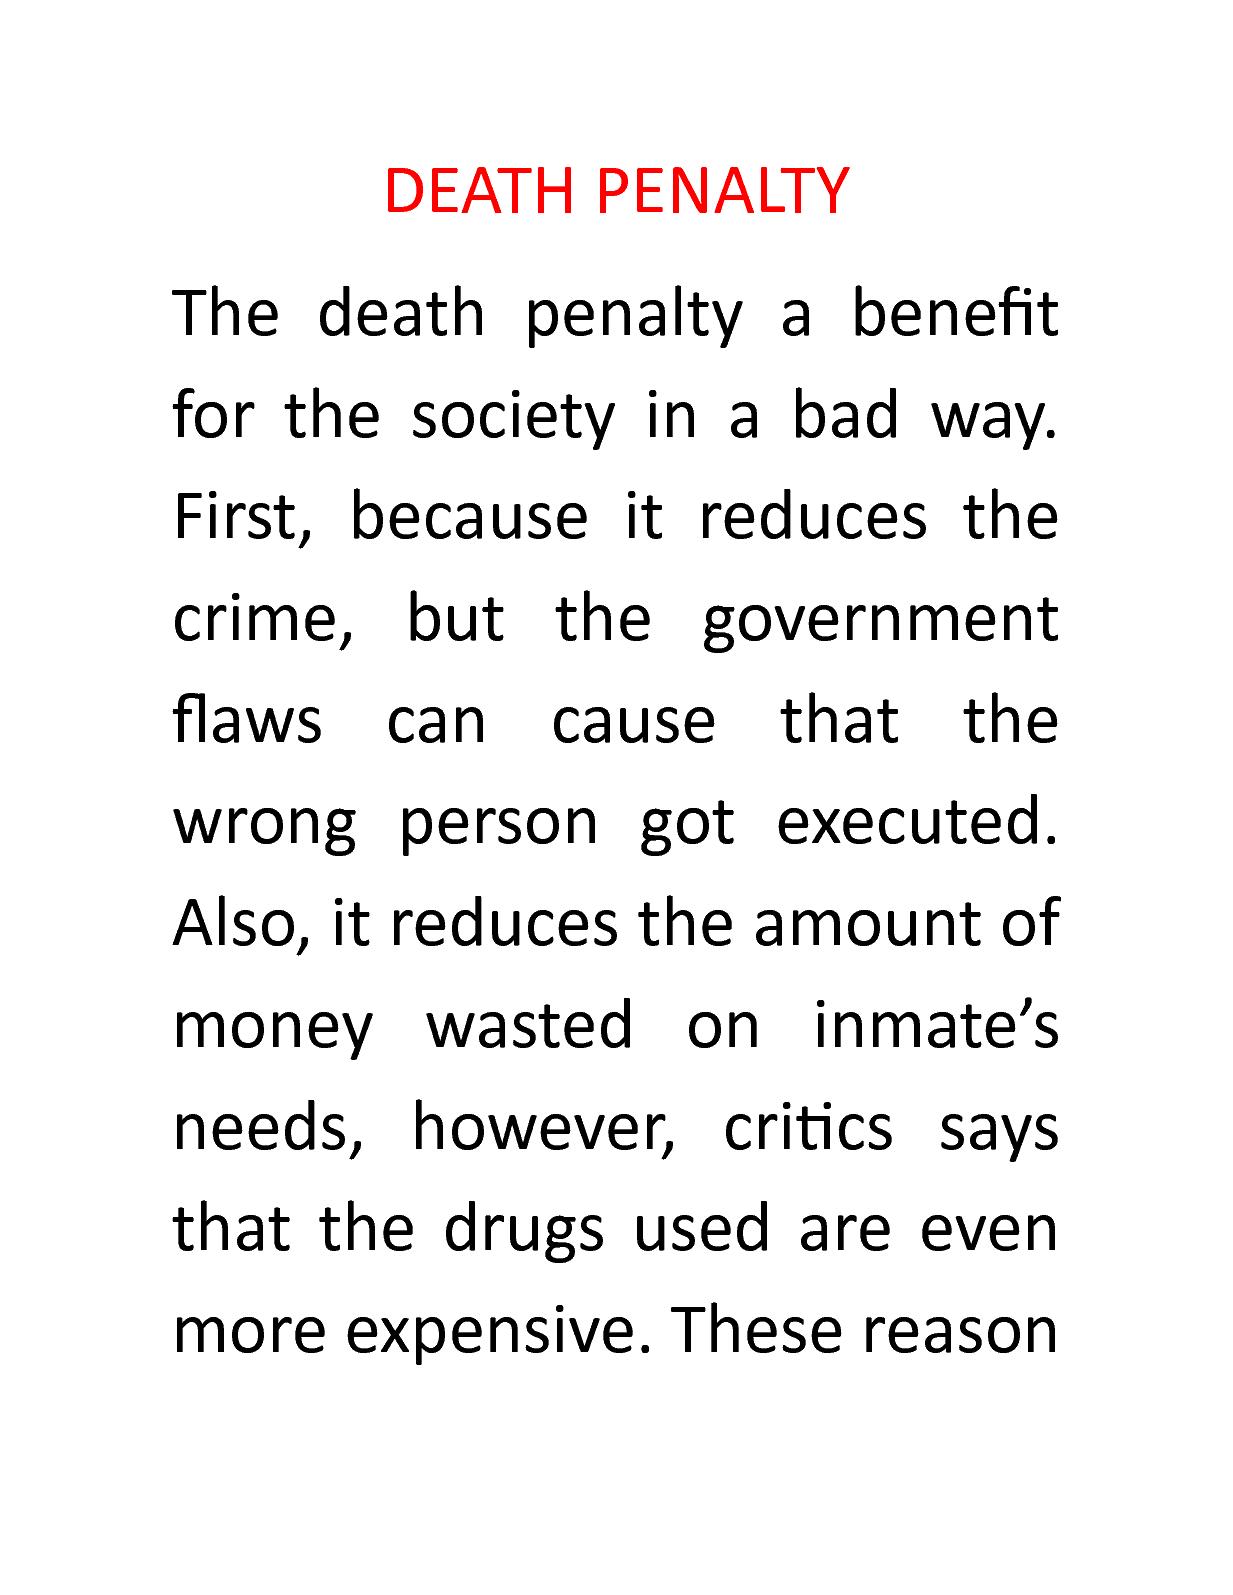 Persuasive Essay against the Death Penalty - MyHomeworkWriters